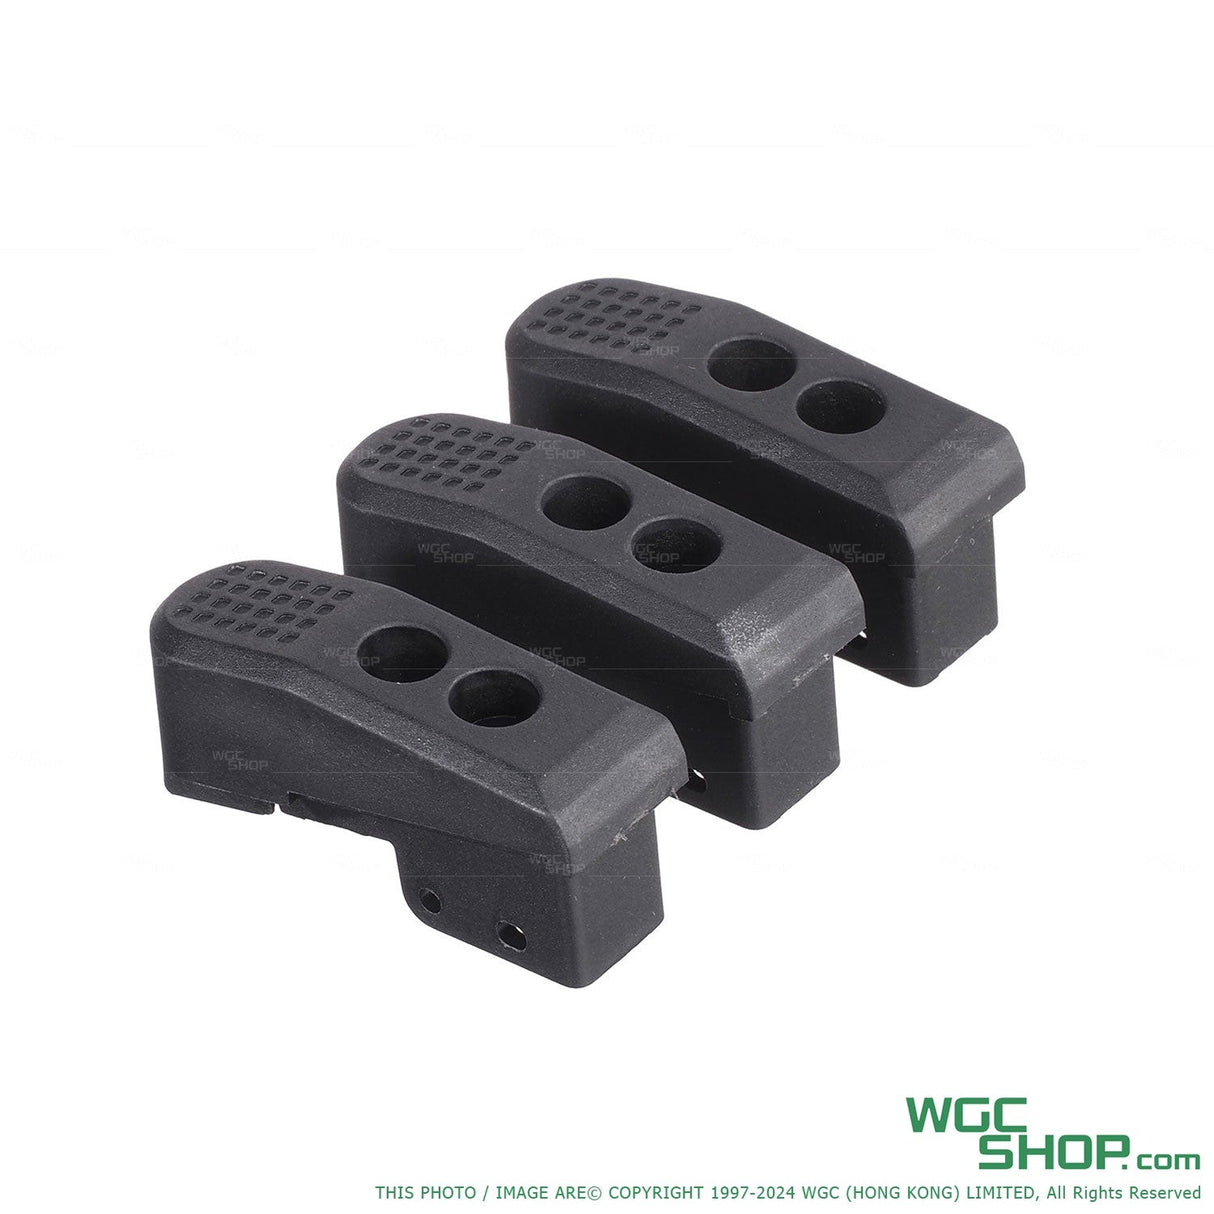 PTS Enhanced Pistol Shockplate Gen 2 (3 PACK) for MARUI 1911 GBB Airsoft